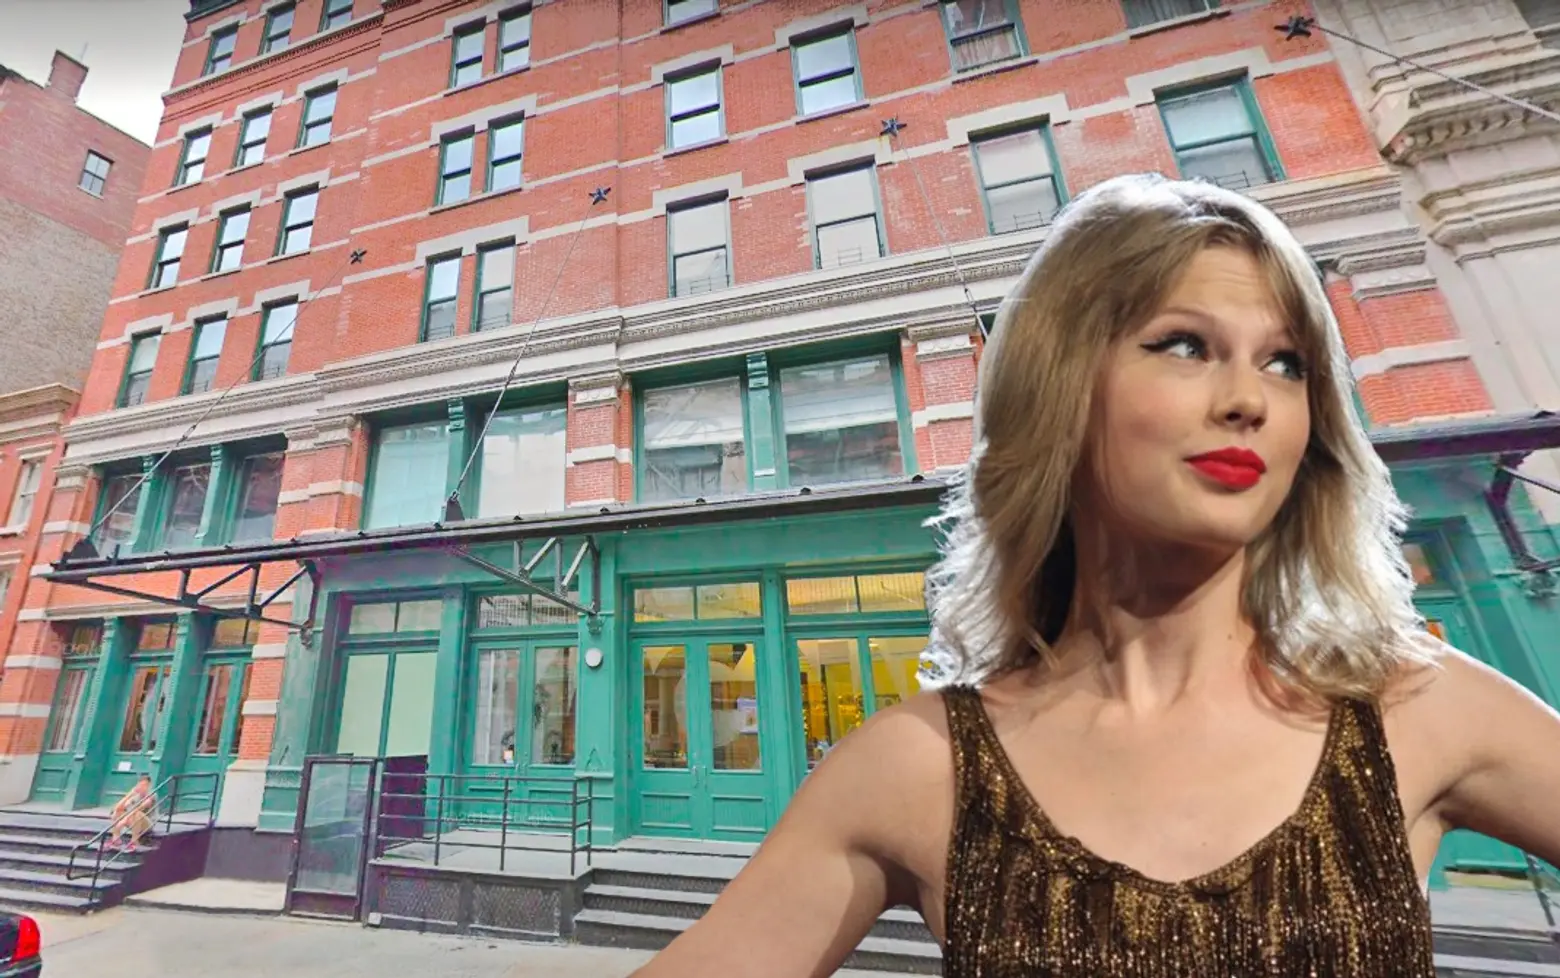 Taylor Swift buys yet another Tribeca property, spending $50M on a single block of real estate